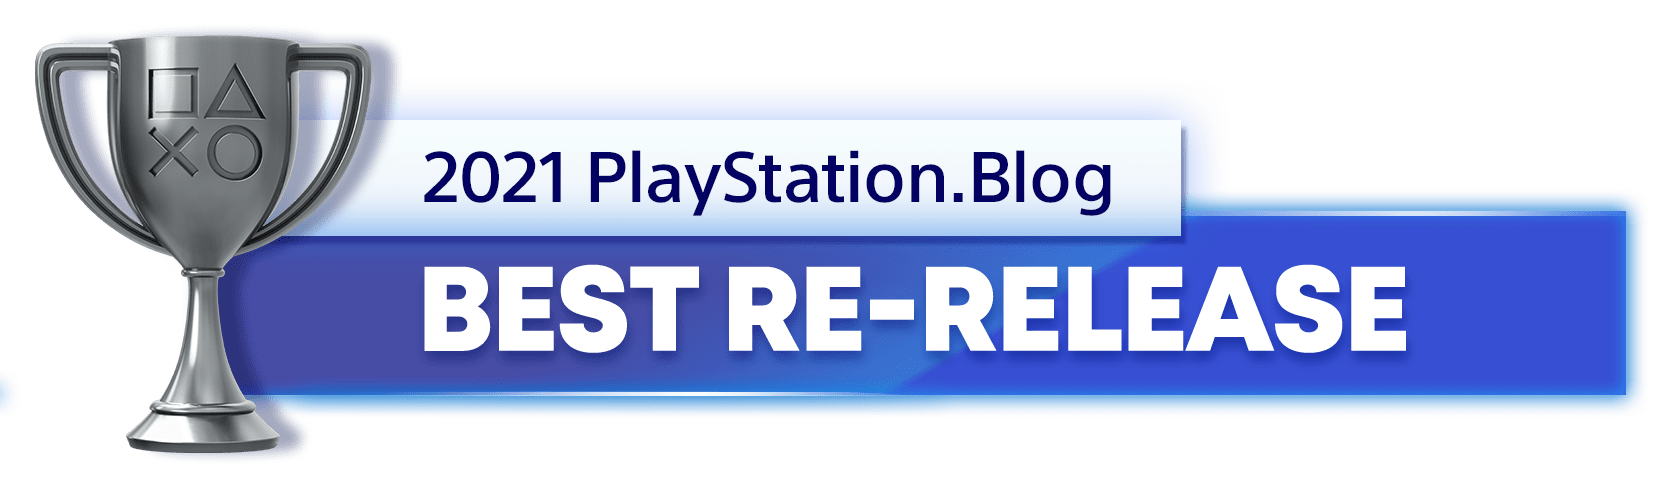 PSU's Game Of The Year 2021 - PlayStation Universe